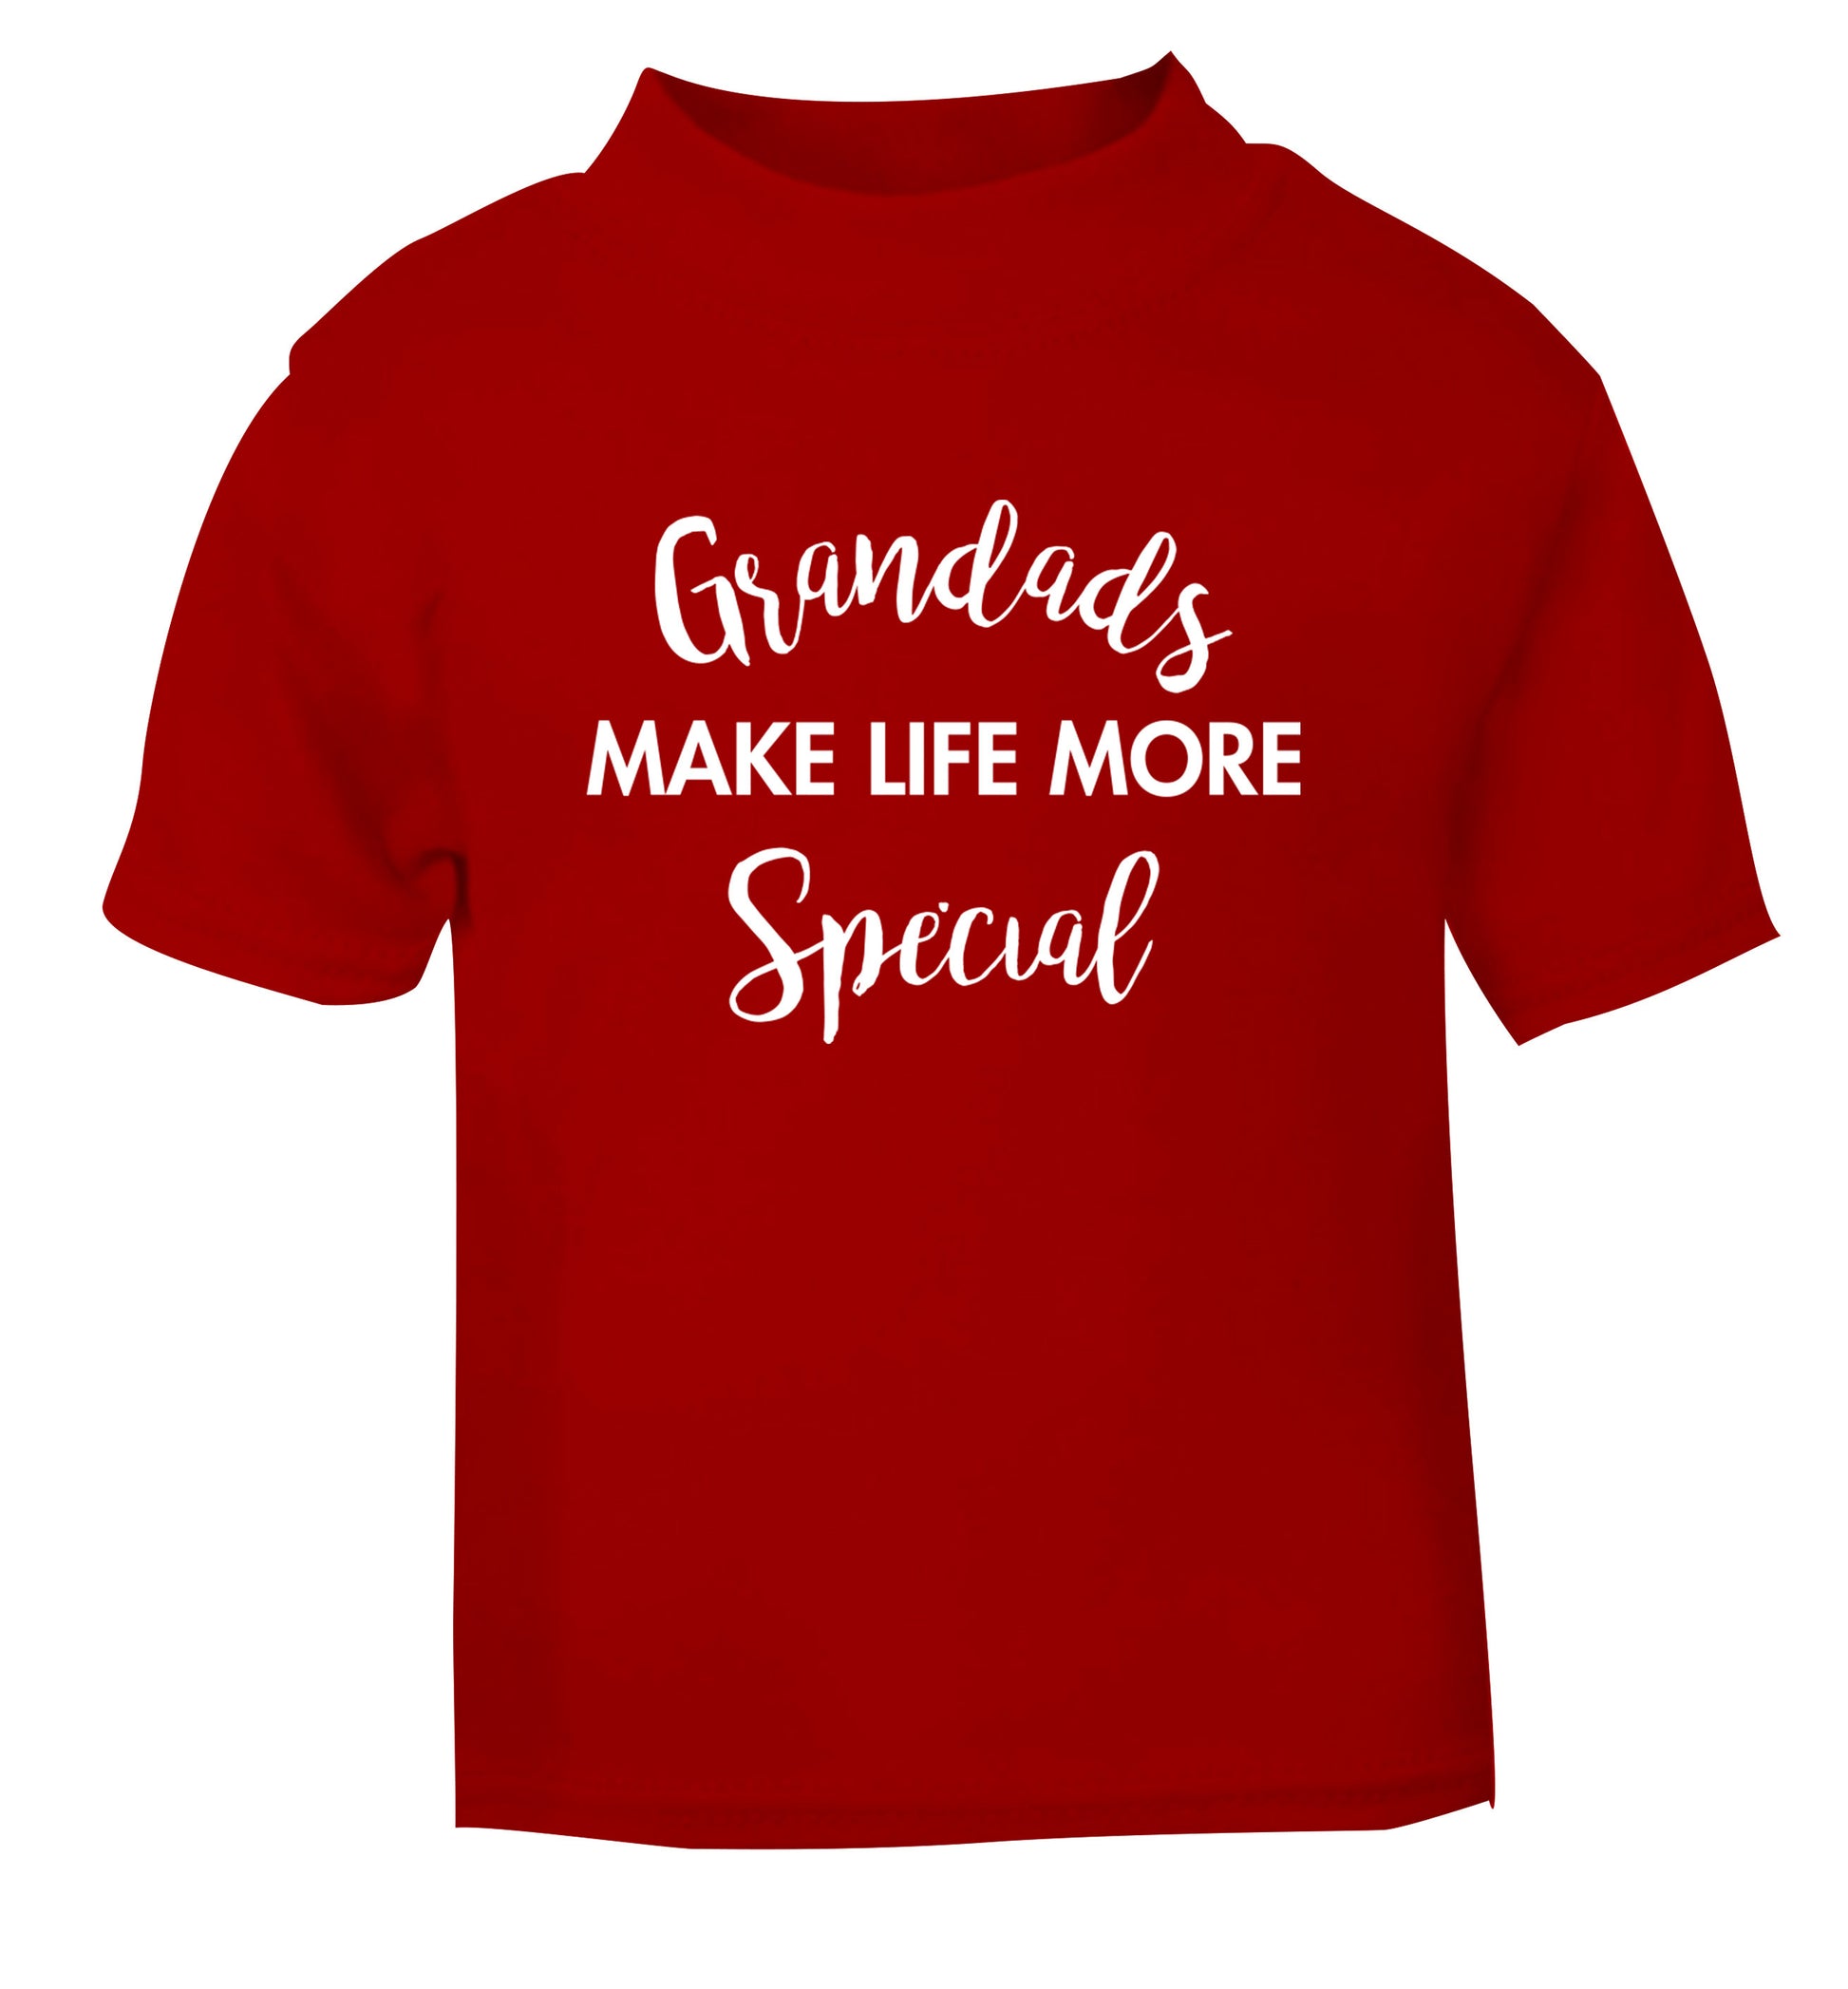 Grandads make life more special red Baby Toddler Tshirt 2 Years